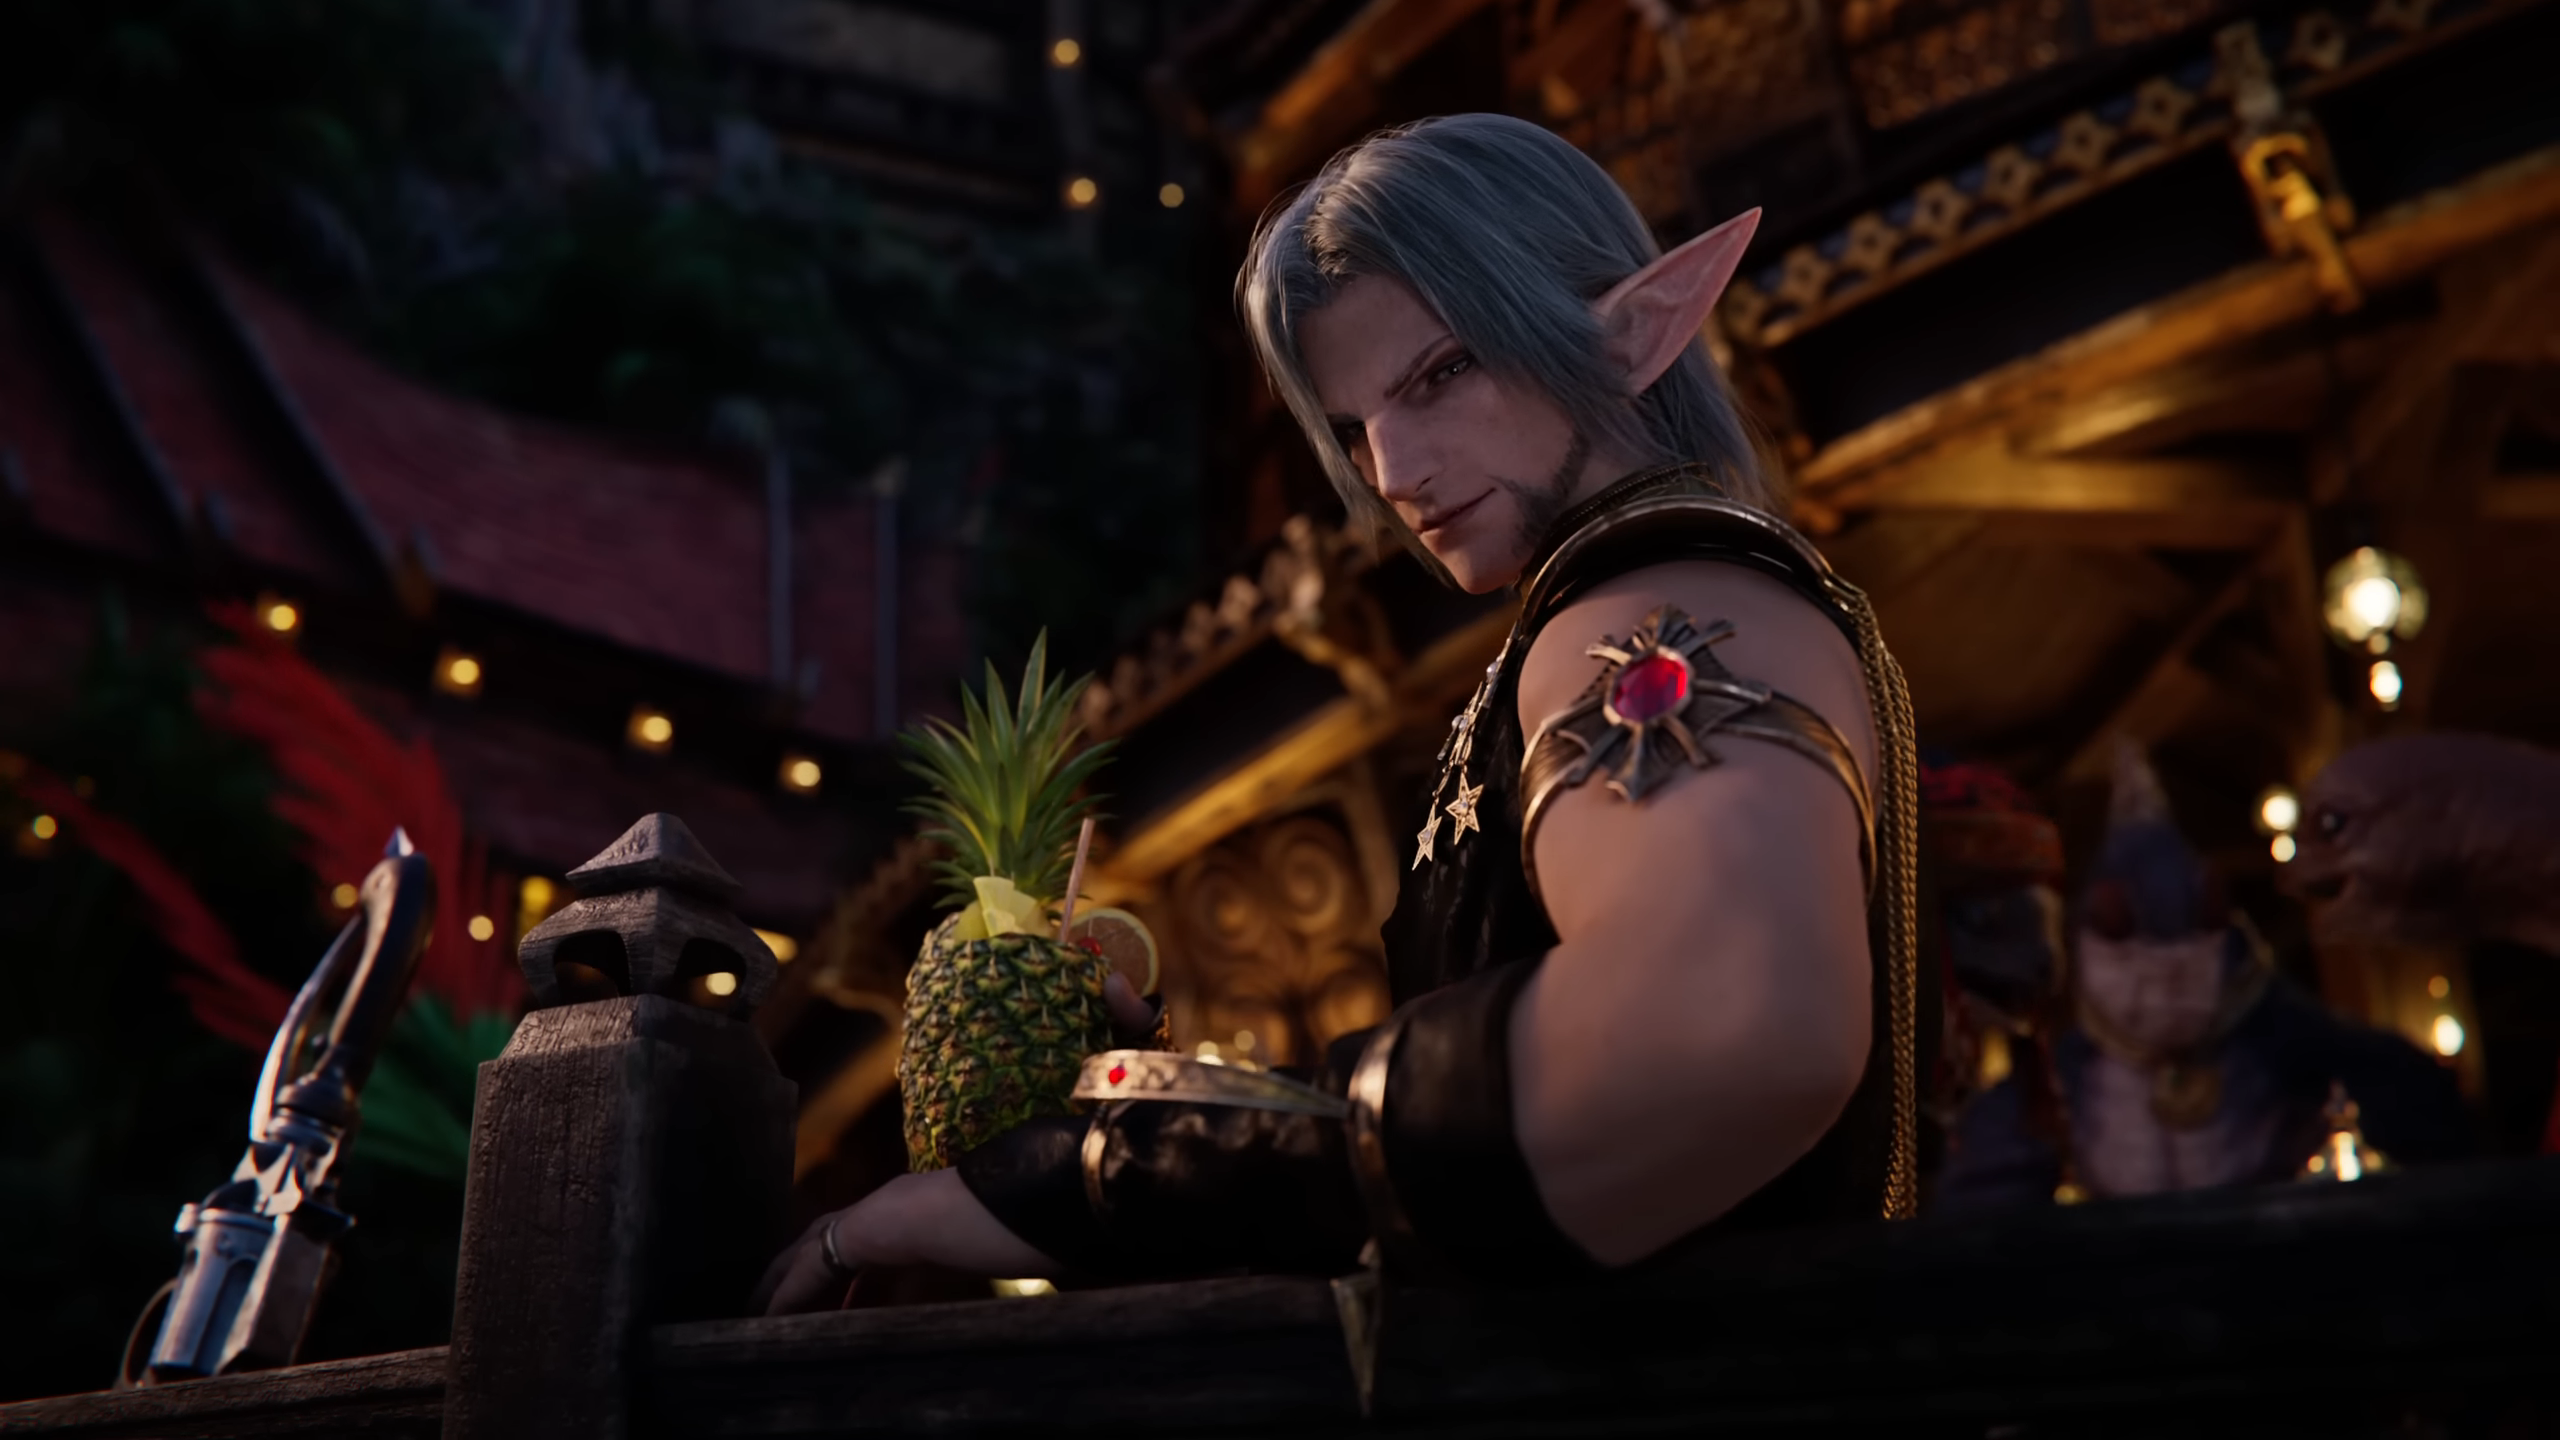 Want to skip straight to Final Fantasy 14 Dawntrail? Square Enix